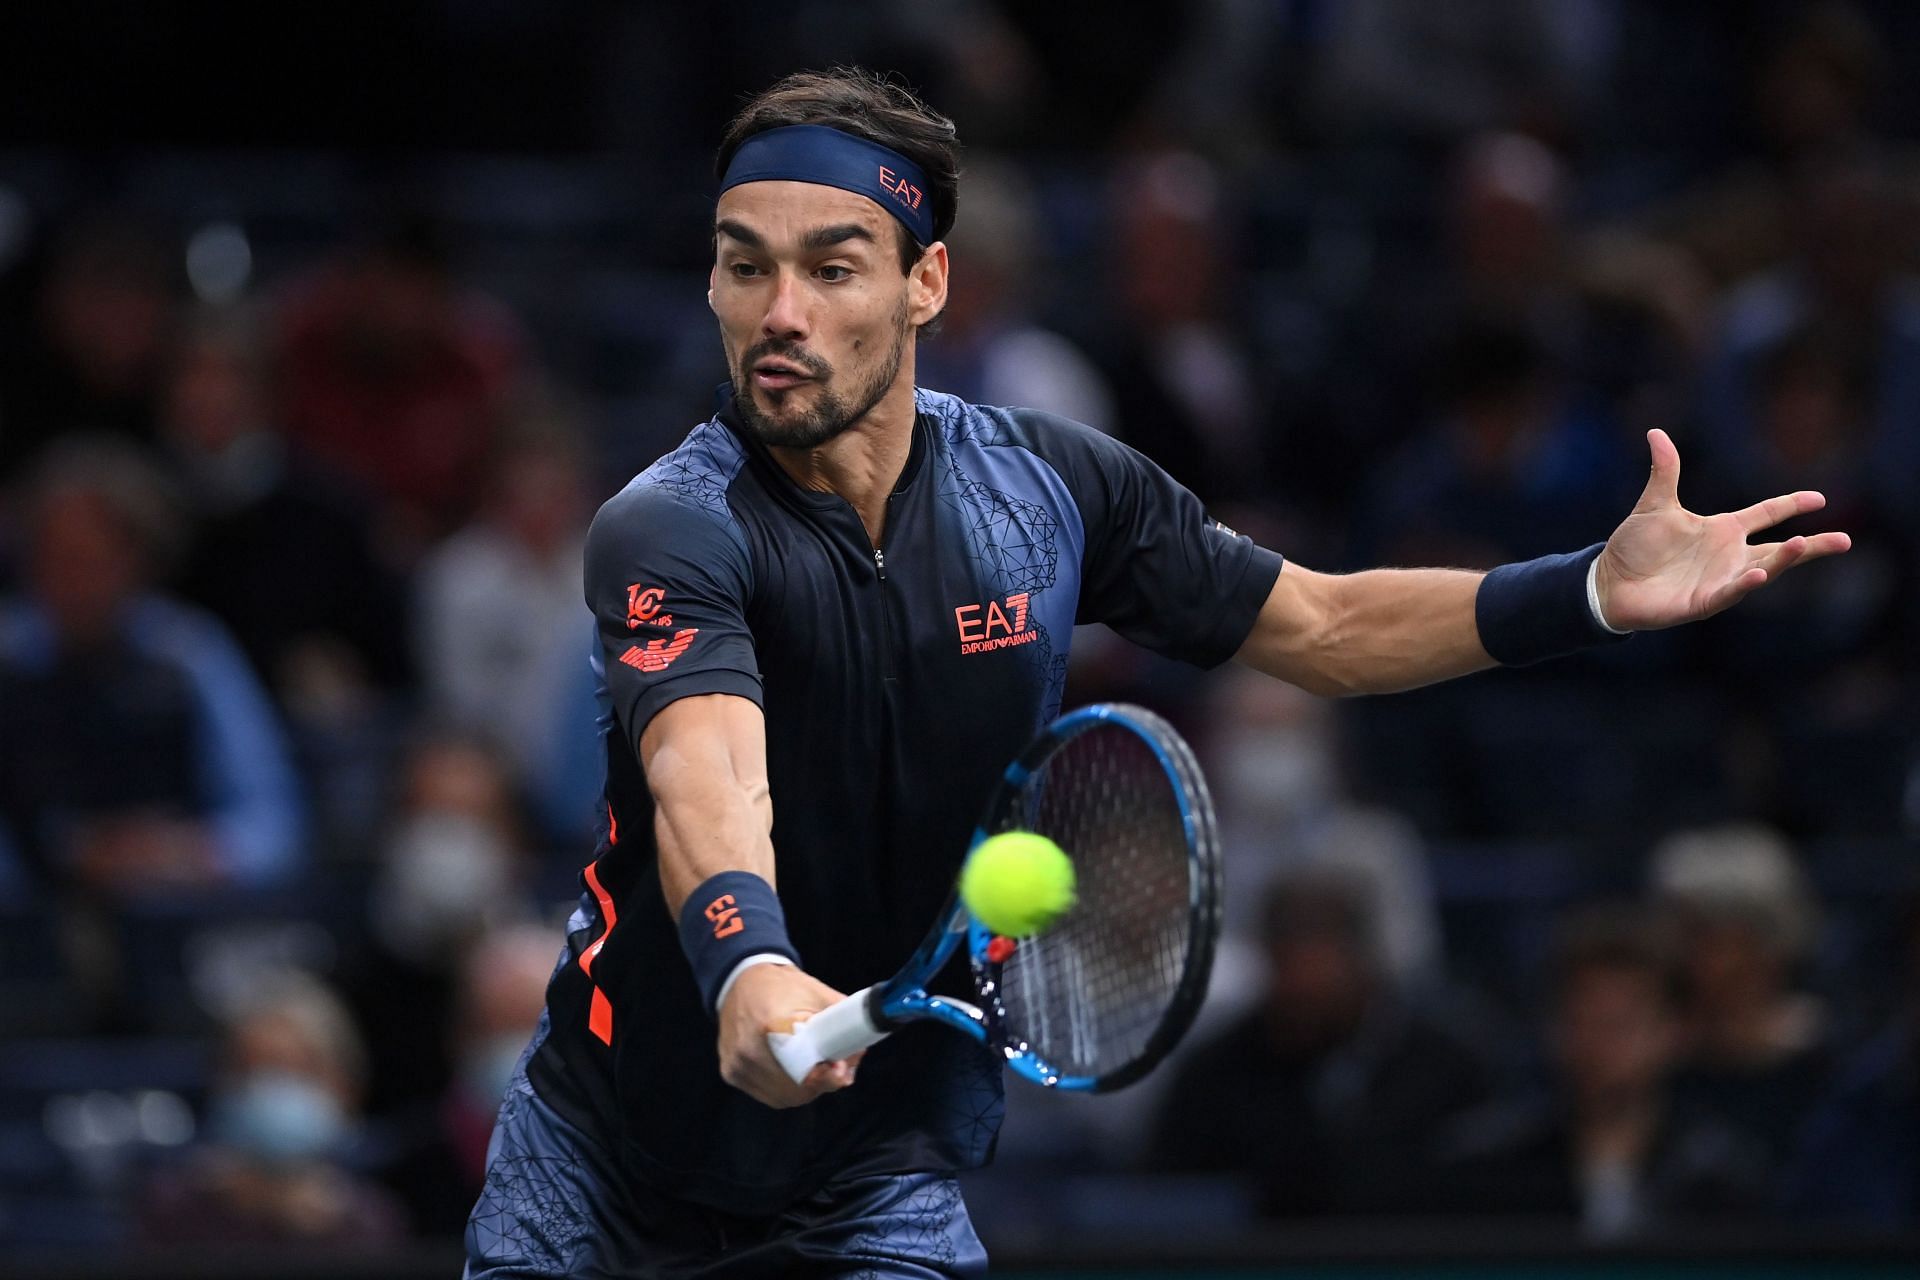 Fognini beat Dominic Thiem in his opening match in Rome